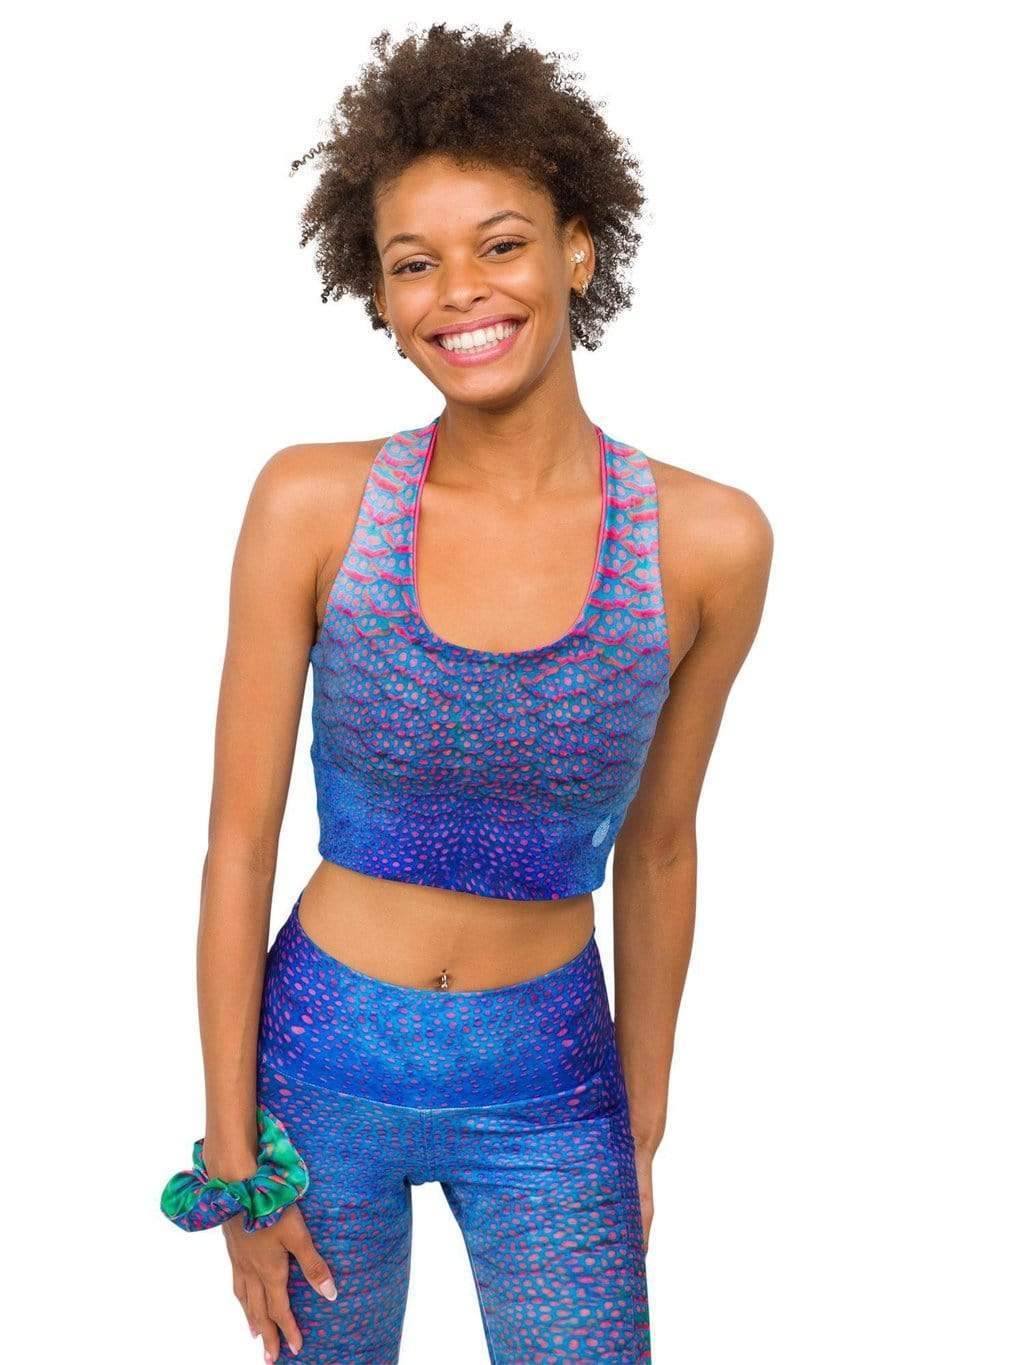 Model: Syriah is a sea turtle conservation biologist. She is 5&#39;7&quot;, 111 lbs and is wearing a size XS top and legging.